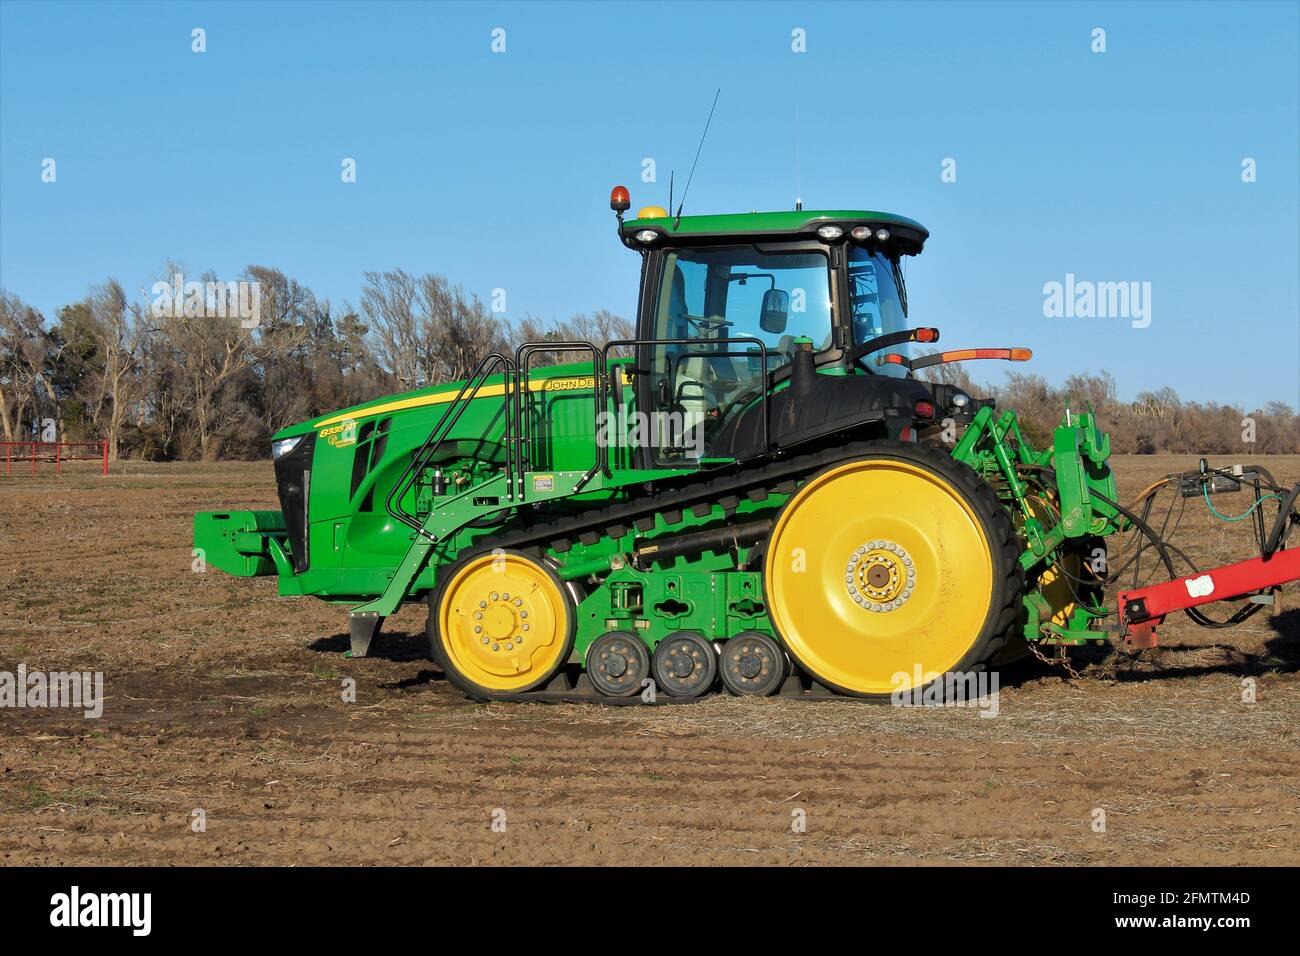 A John Deere track tractor in a farm field with blue sky and tree's out in the country. Stock Photo